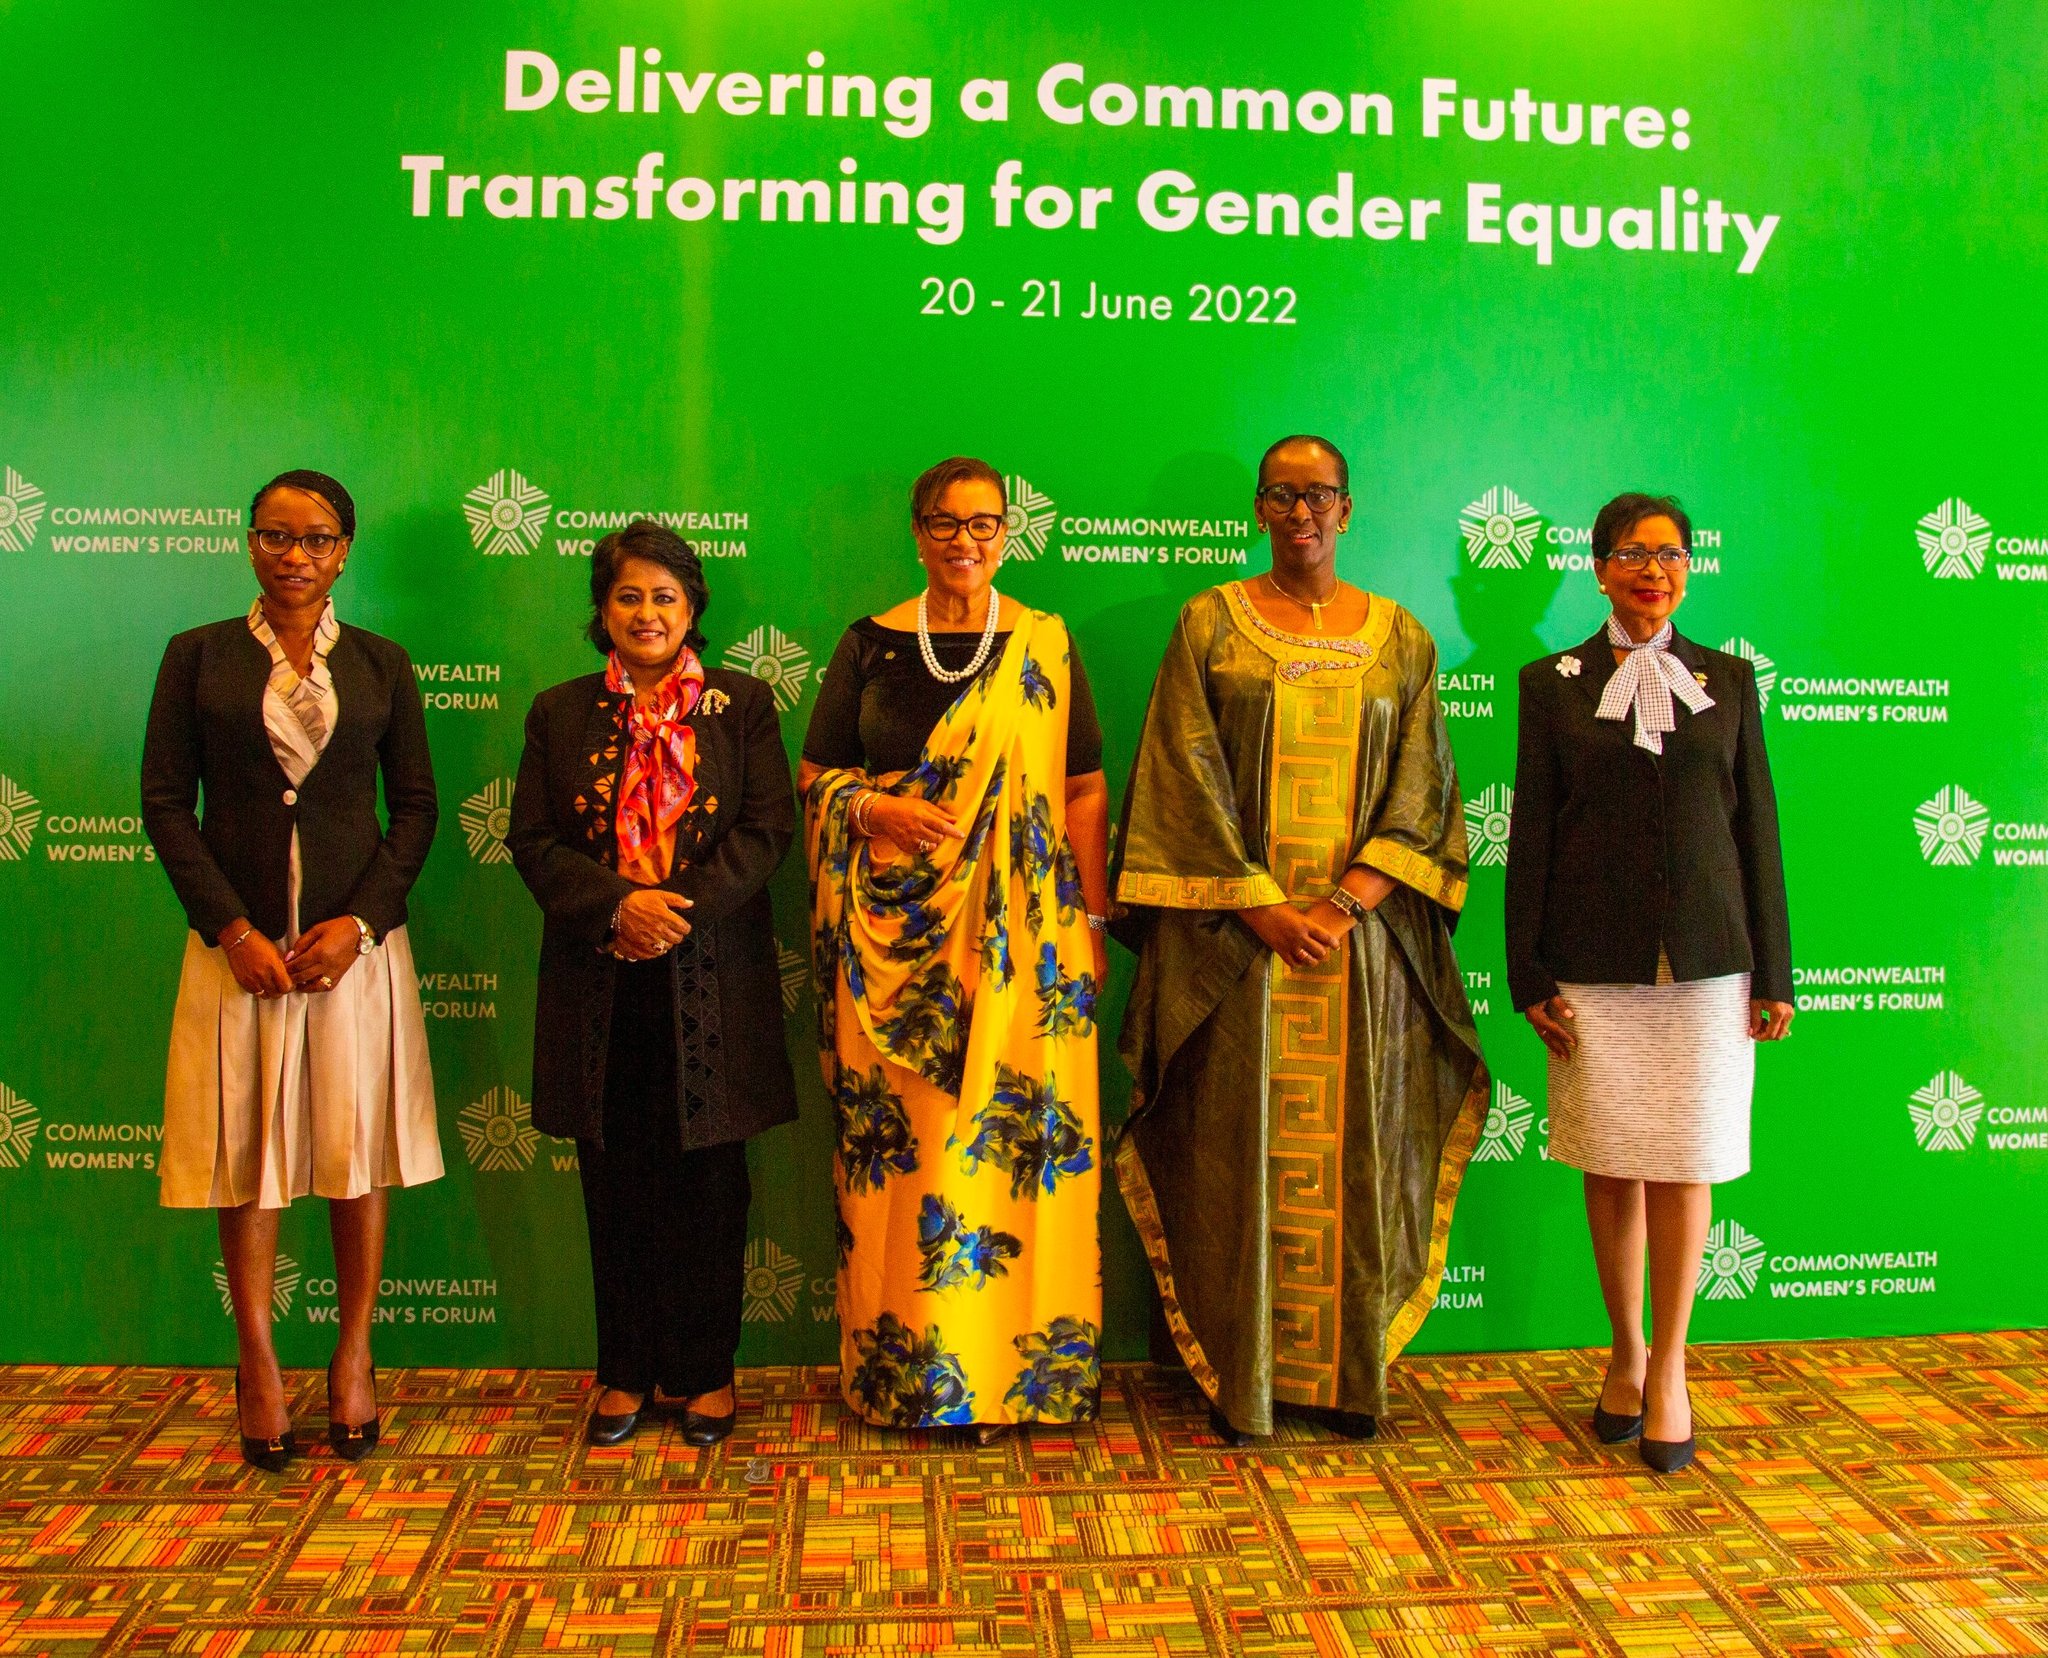 Jeannette Kagame, the First Lady of Rwanda and Patricia Scotland the Commonwealth Secretary General in a photo with other delegates at the opening of the Commonwealth Women's Forum in Kigali on Monday, June 20, 2022. Photo/ Craish Bahizi